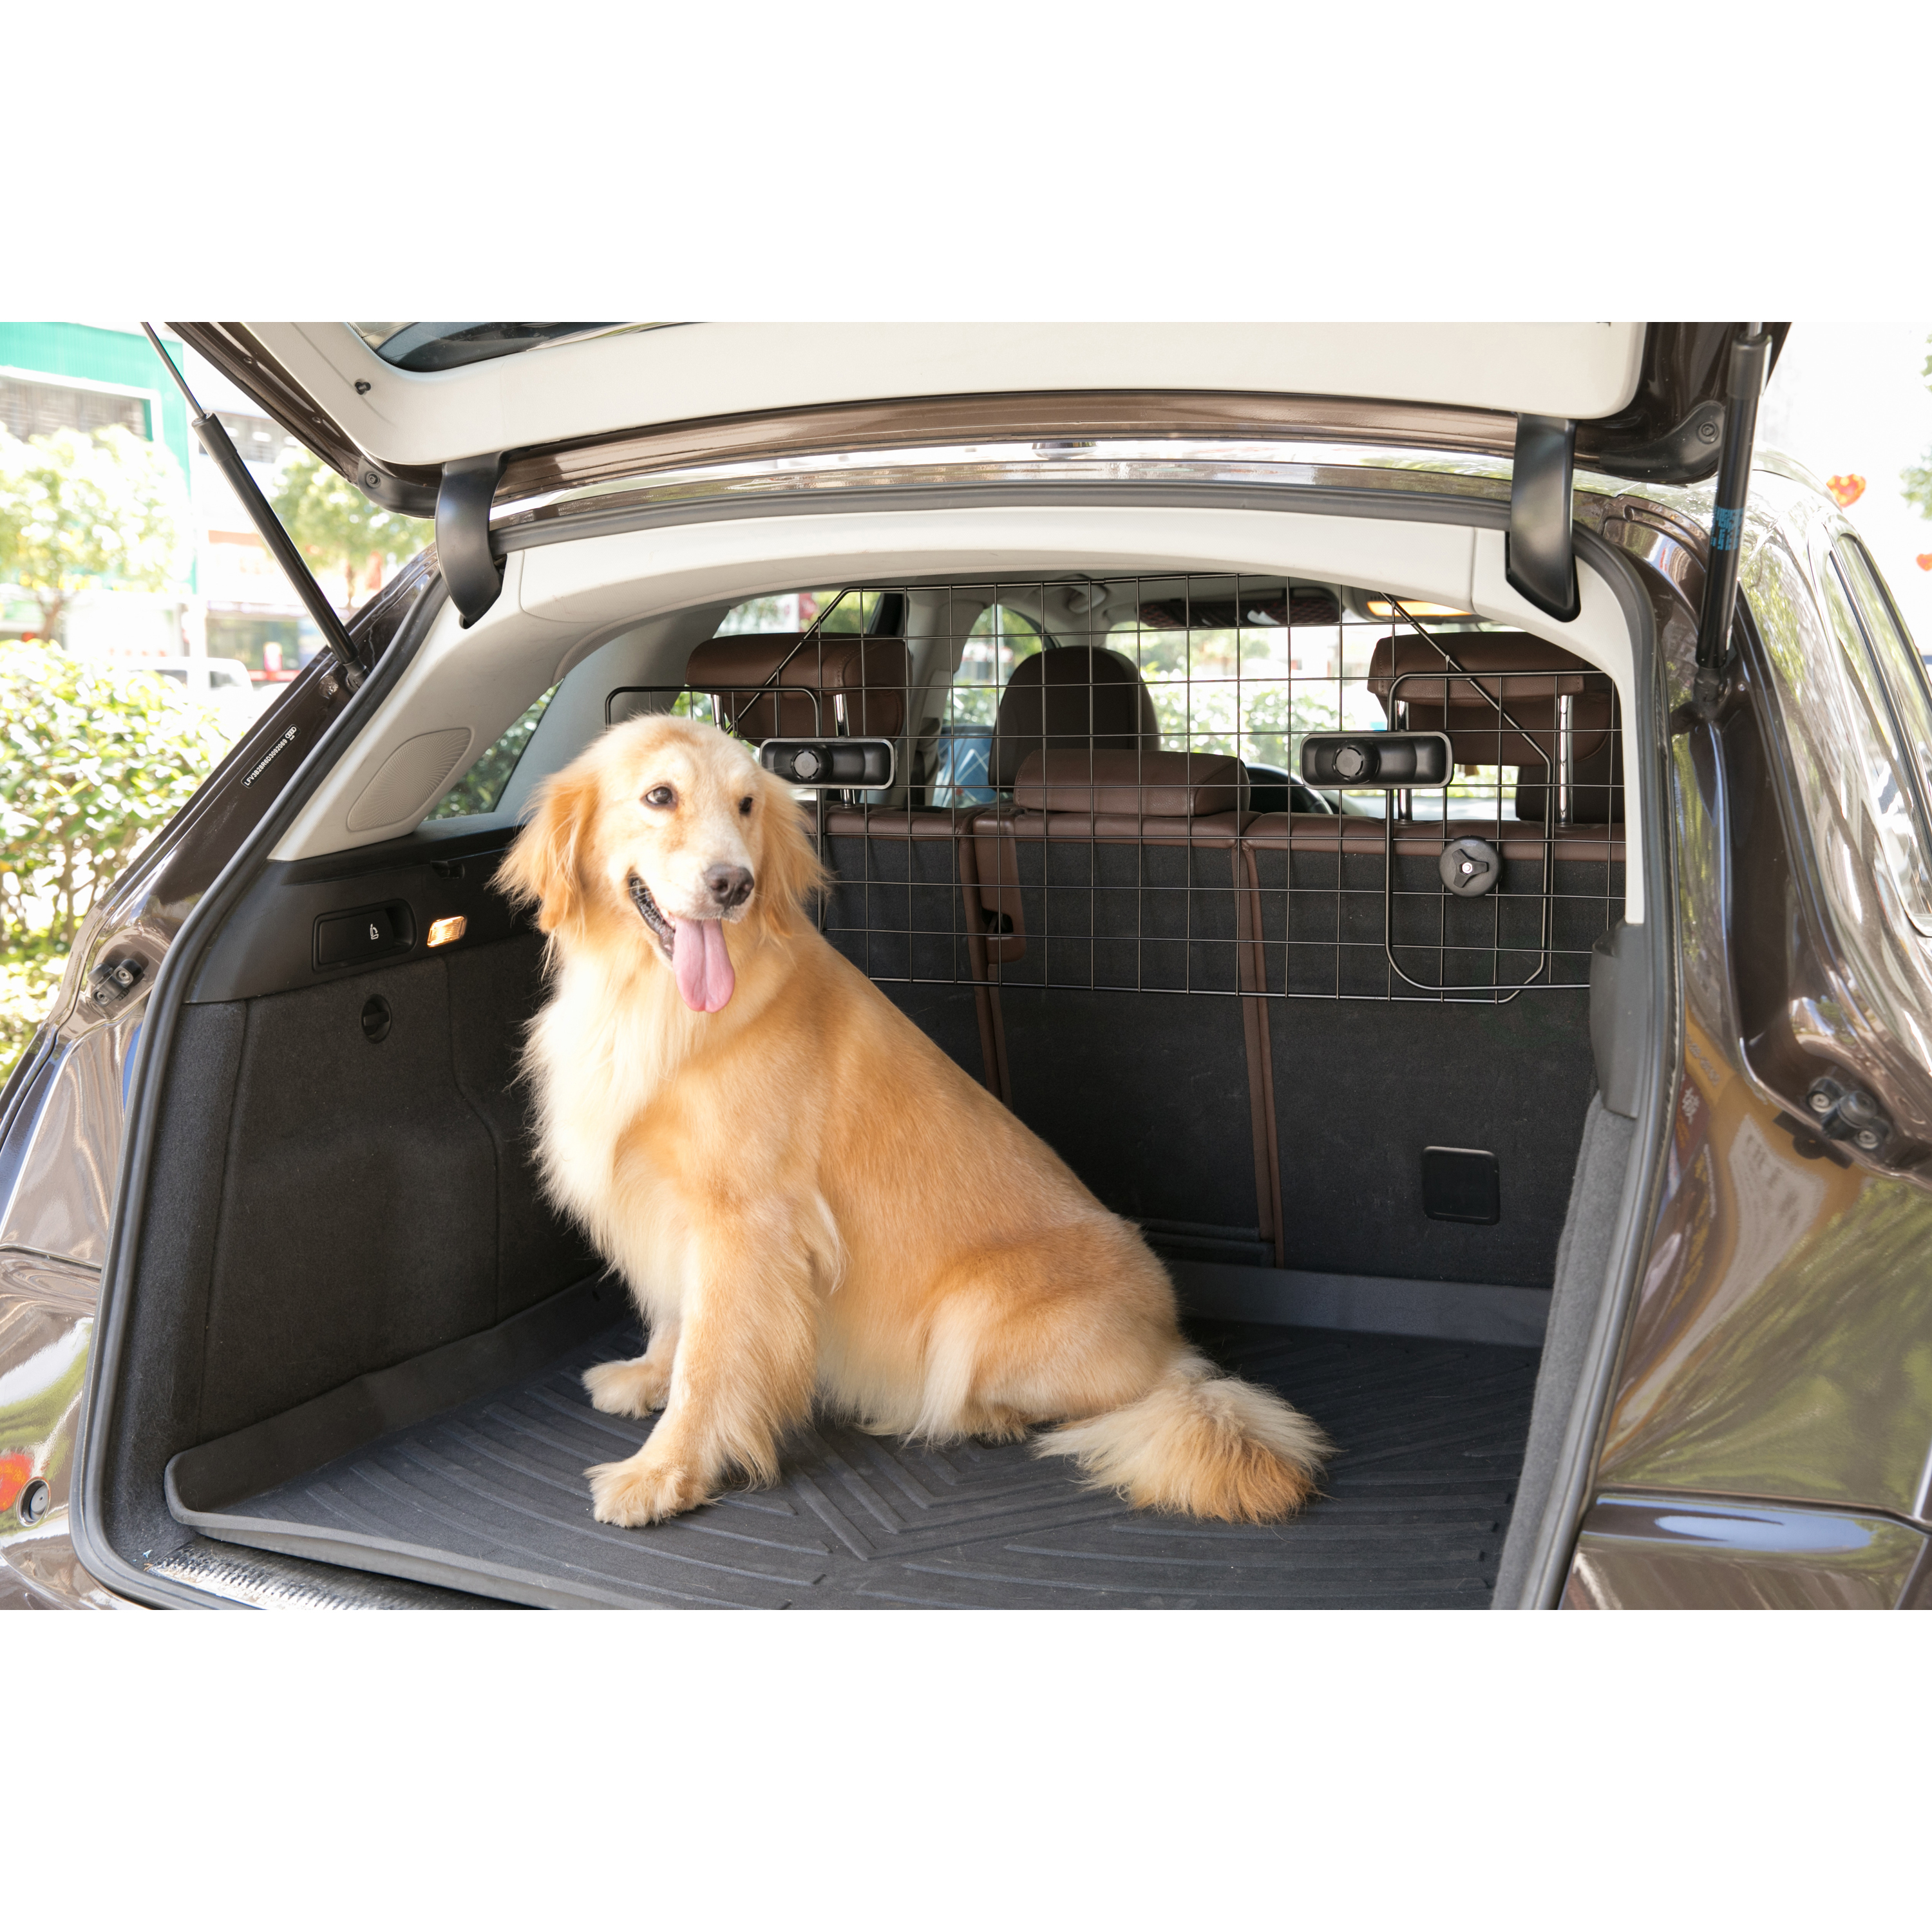 Adjustable Large Pet Barrier Gate For SUV's, Cars Vans And Vehicles Safety Car Divider For Dogs Pets, Heavy Duty Universal Fit